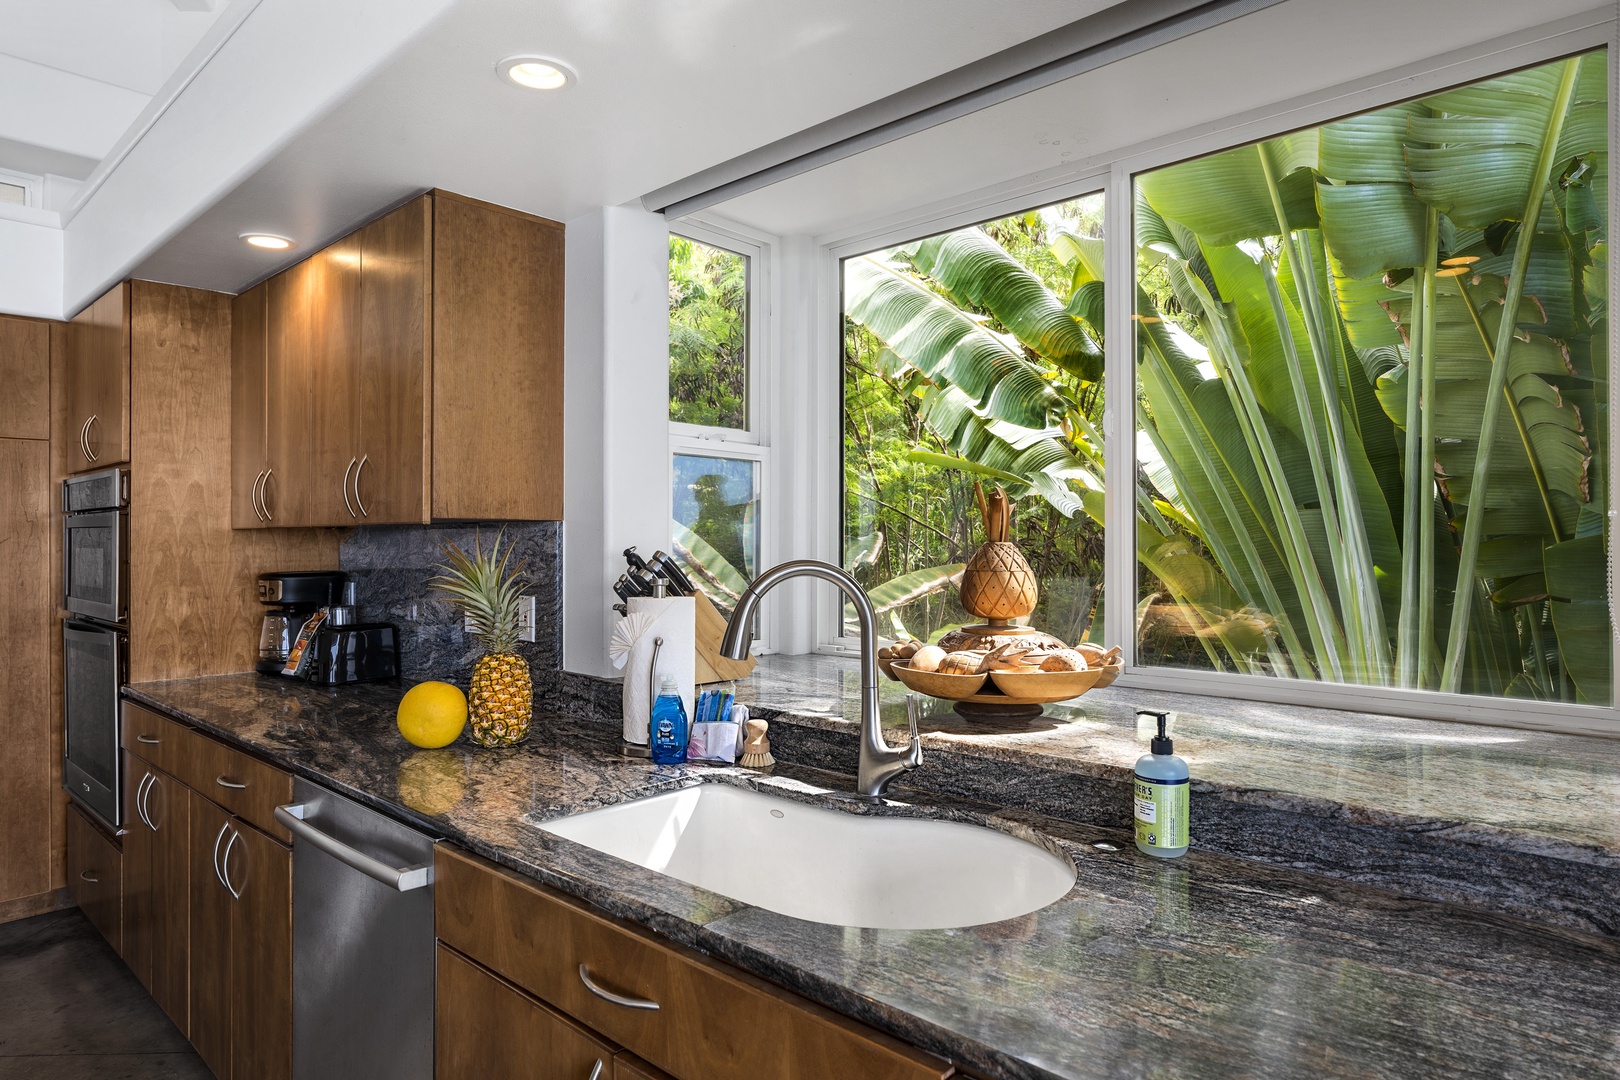 Kailua-Kona Vacation Rentals, Hale Kope Kai - Wash dishes while taking in the lush landscaping surrounding the property